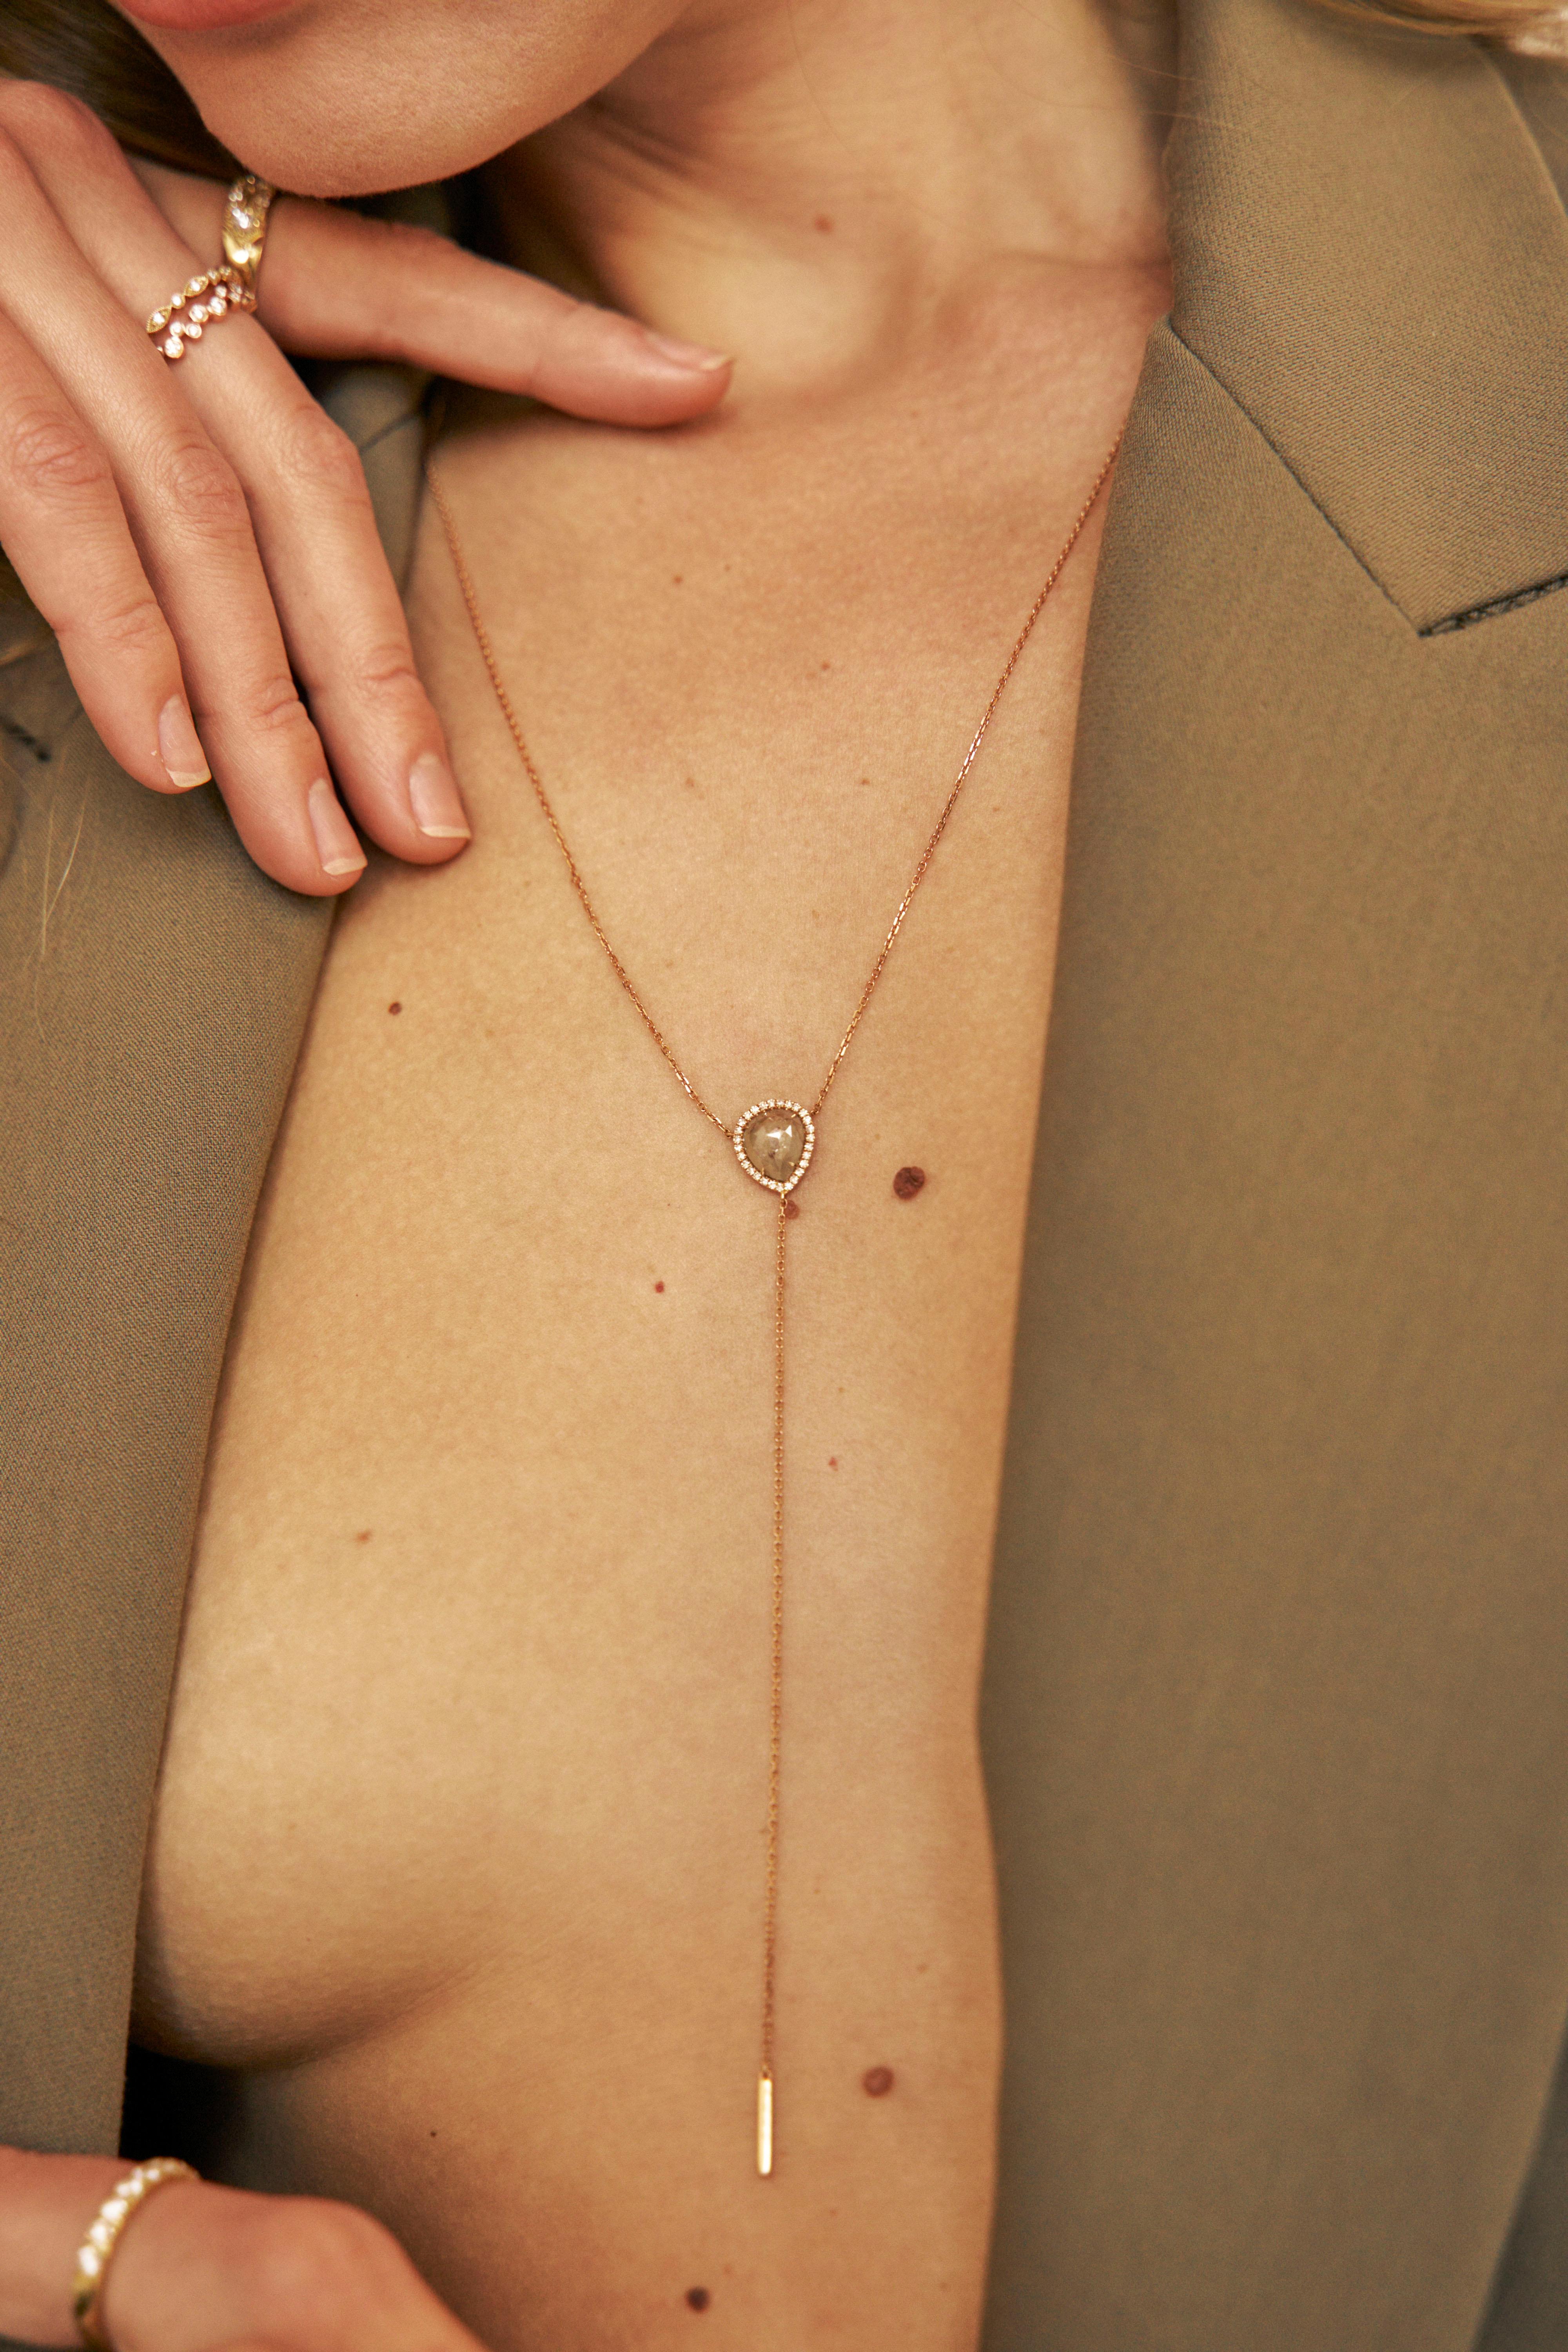 Rough Diamond Lariat is a perfect statement piece for every day. It's made from 18-karat gold with a rough facet diamond. Wear yours solo with a deep-cut shirt for the greatest impact.

18kt Rose Gold
Chain Length: 20” - 22”
Center Stone Weight: